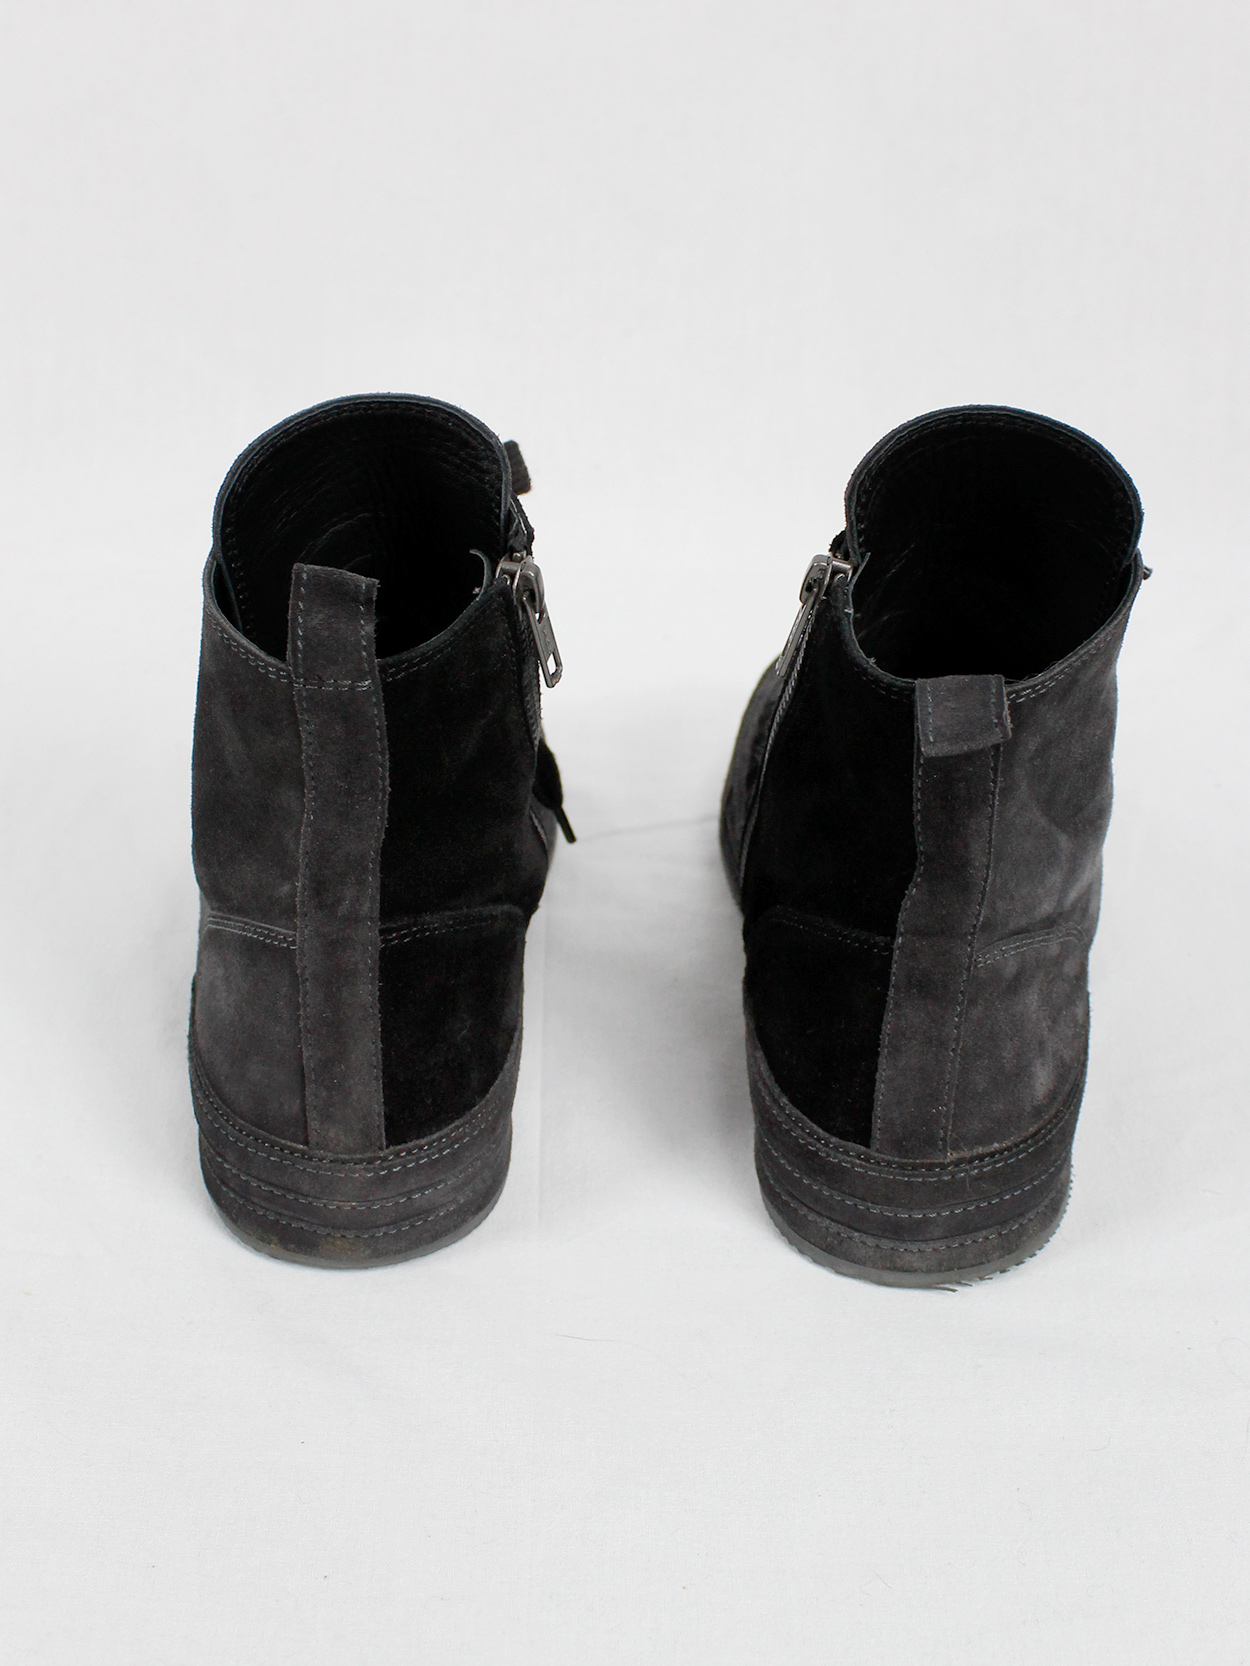 vintage Ann Demeulemeester black and grey two-tone sneakers (7)